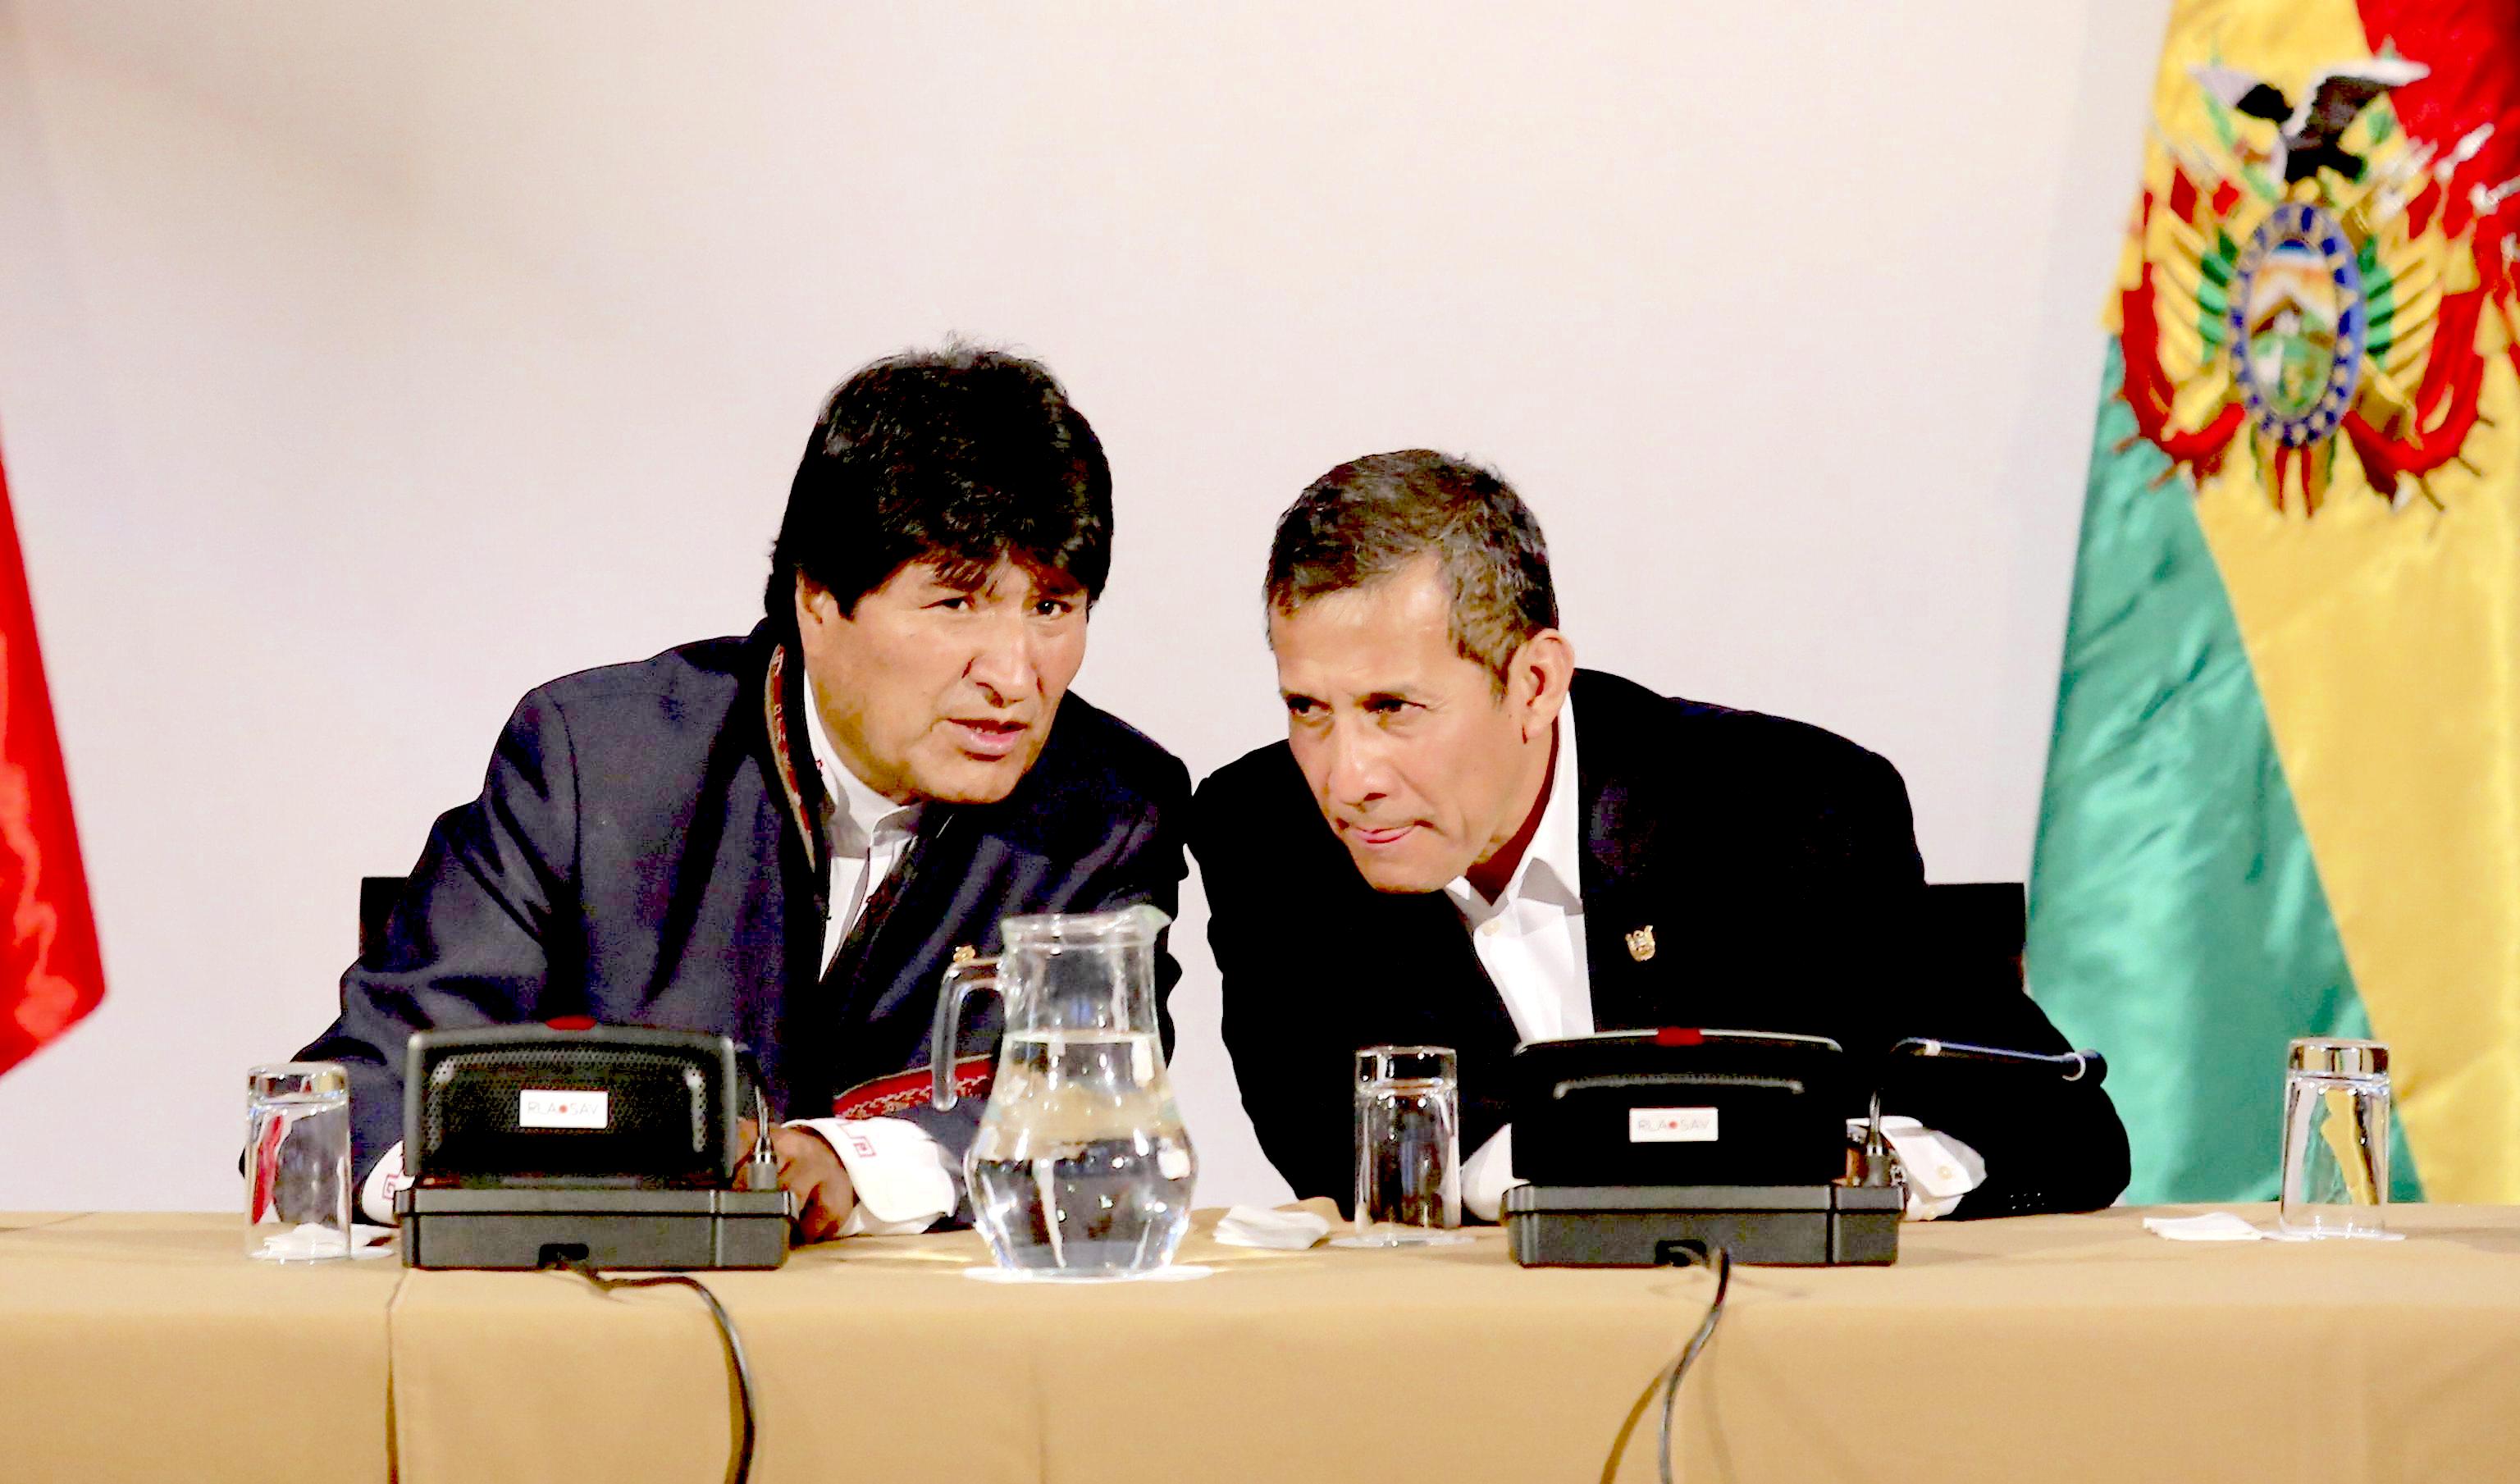 Peruvian President Ollanta Humala (R) and his Bolivian counterpart Evo Morales (L) speak with each other during the first Bolivia-Peru Cabinets meeting